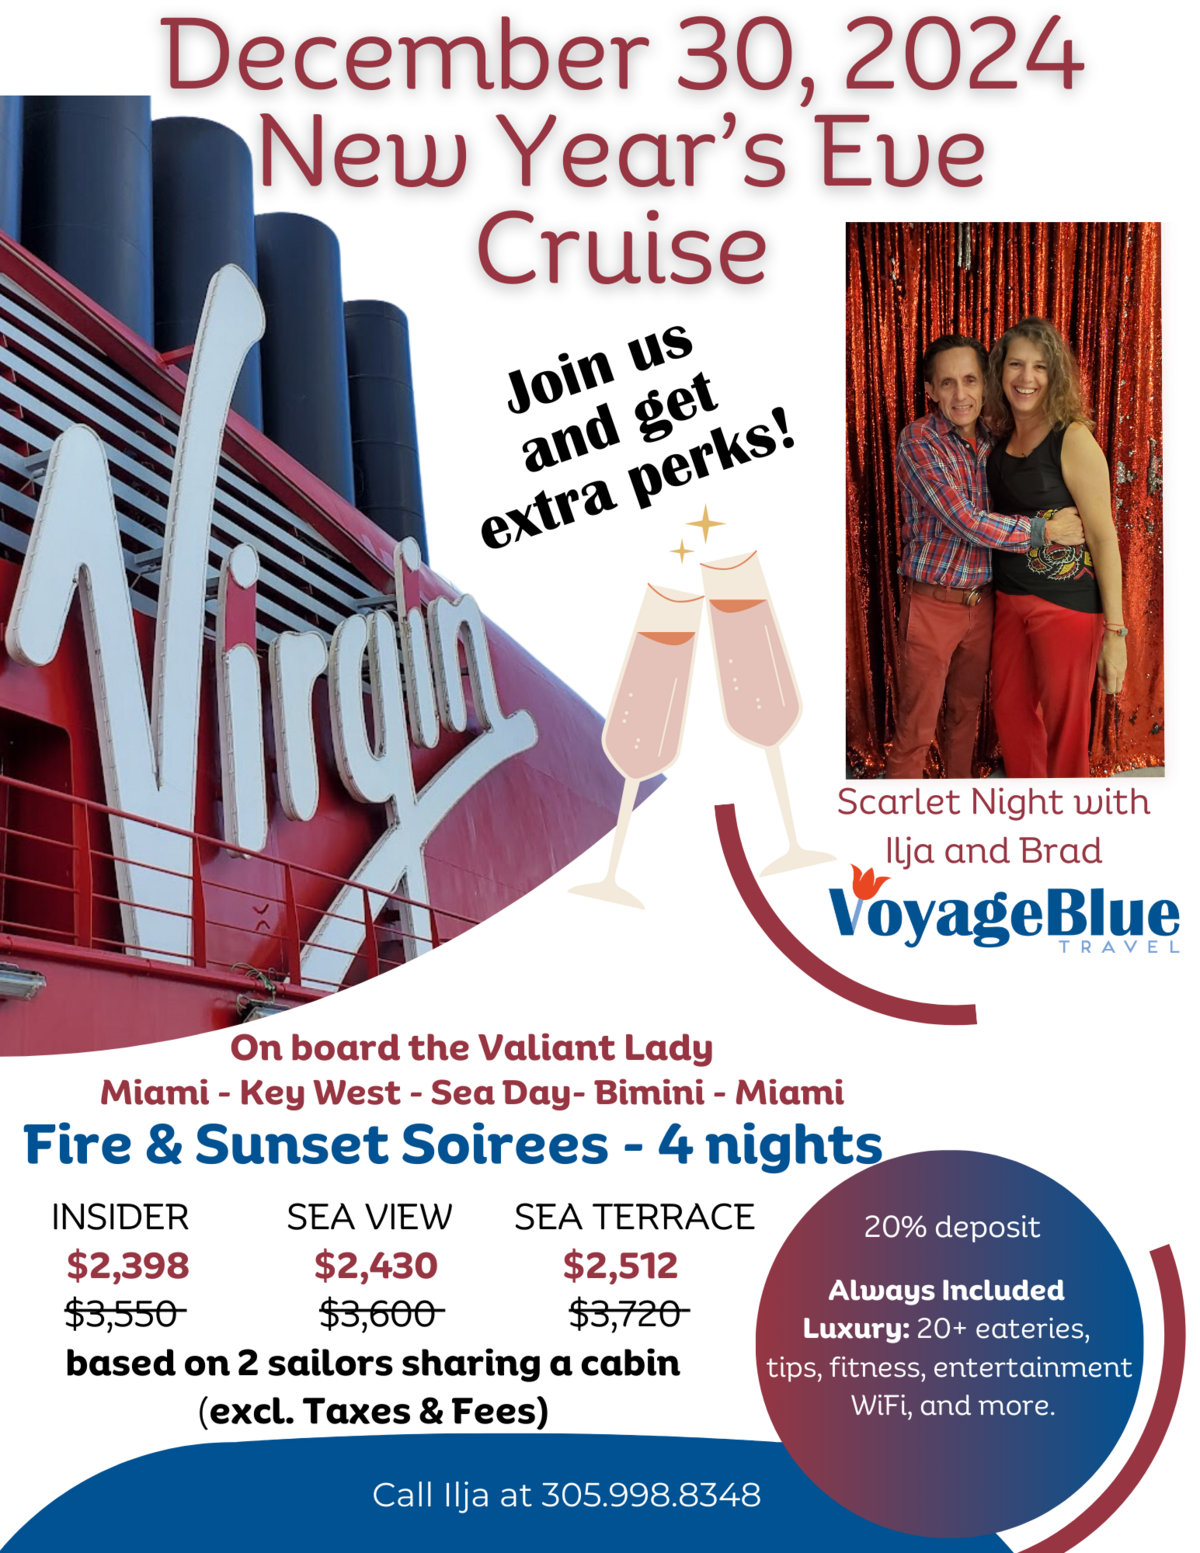 New Years Eve Virgin Voyages 2024